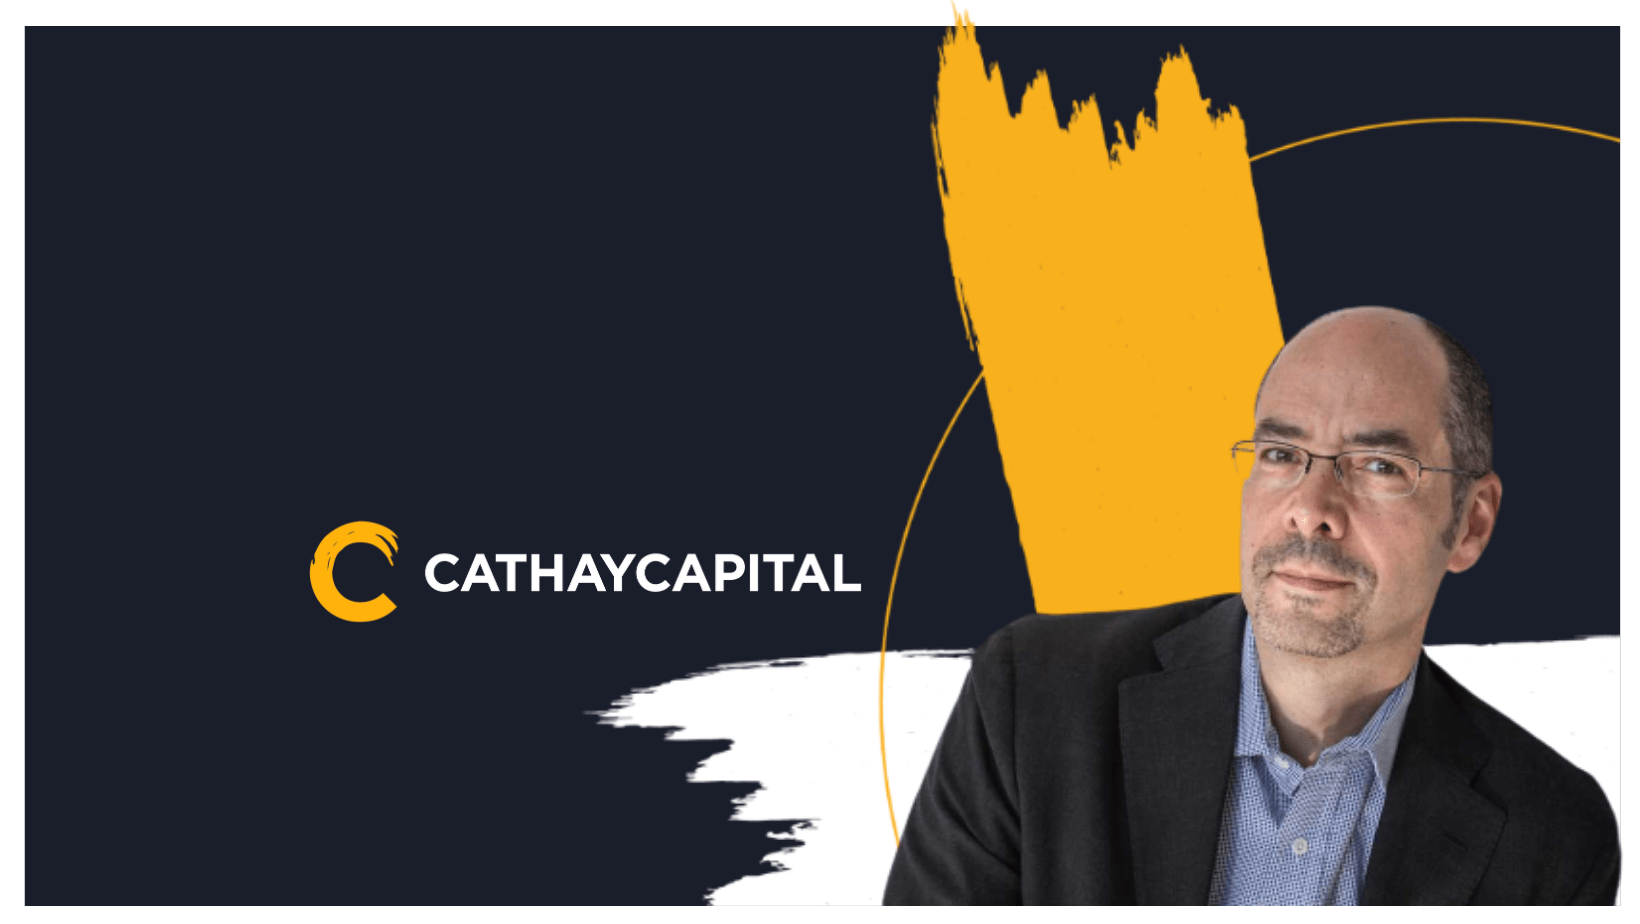 Marc Jourlait joins Cathay Capital as Operating Partner